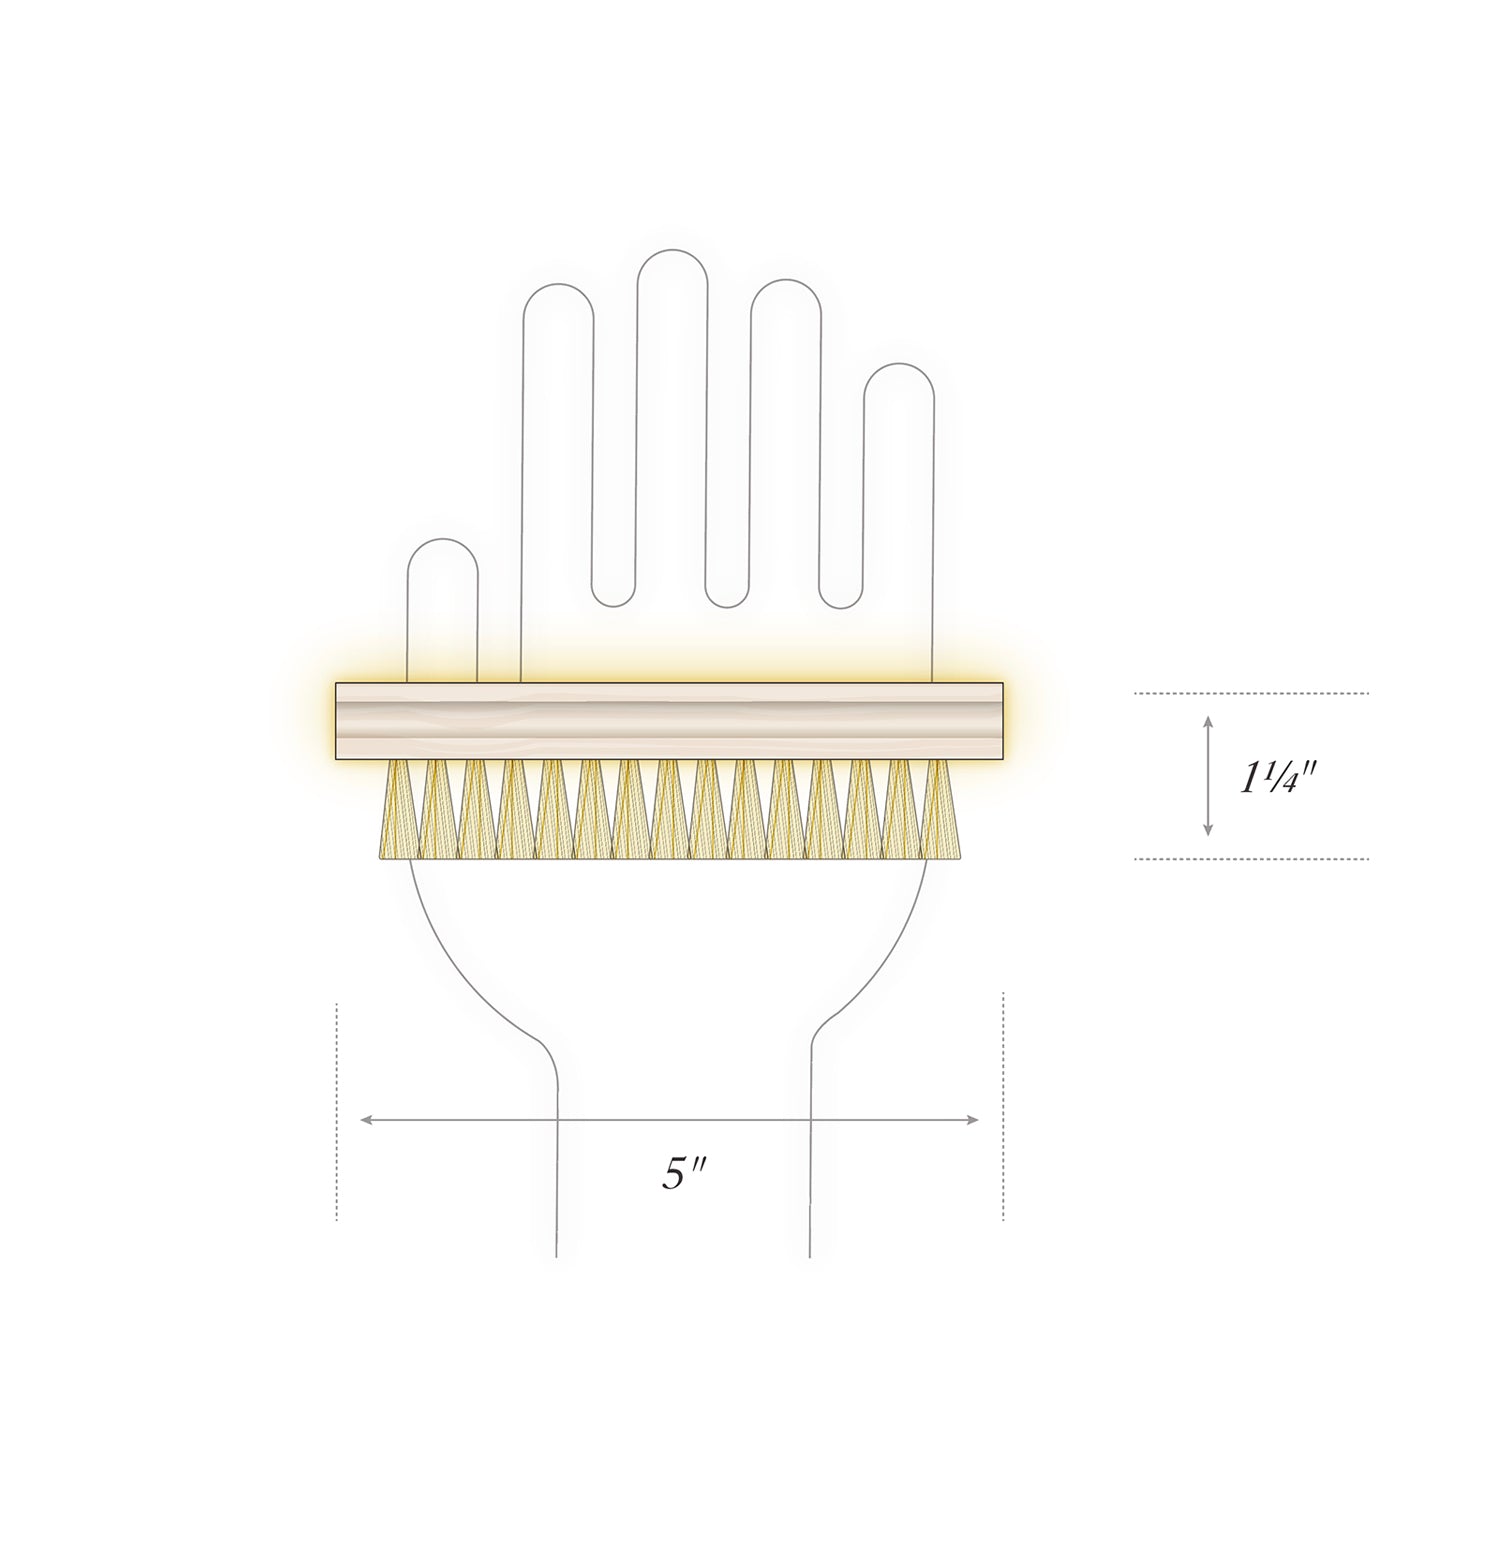 Diagram of human hand and side view of wood-handled brush with tampico bristles showing size of brush to be five inches in length and one and one-half inches in width.